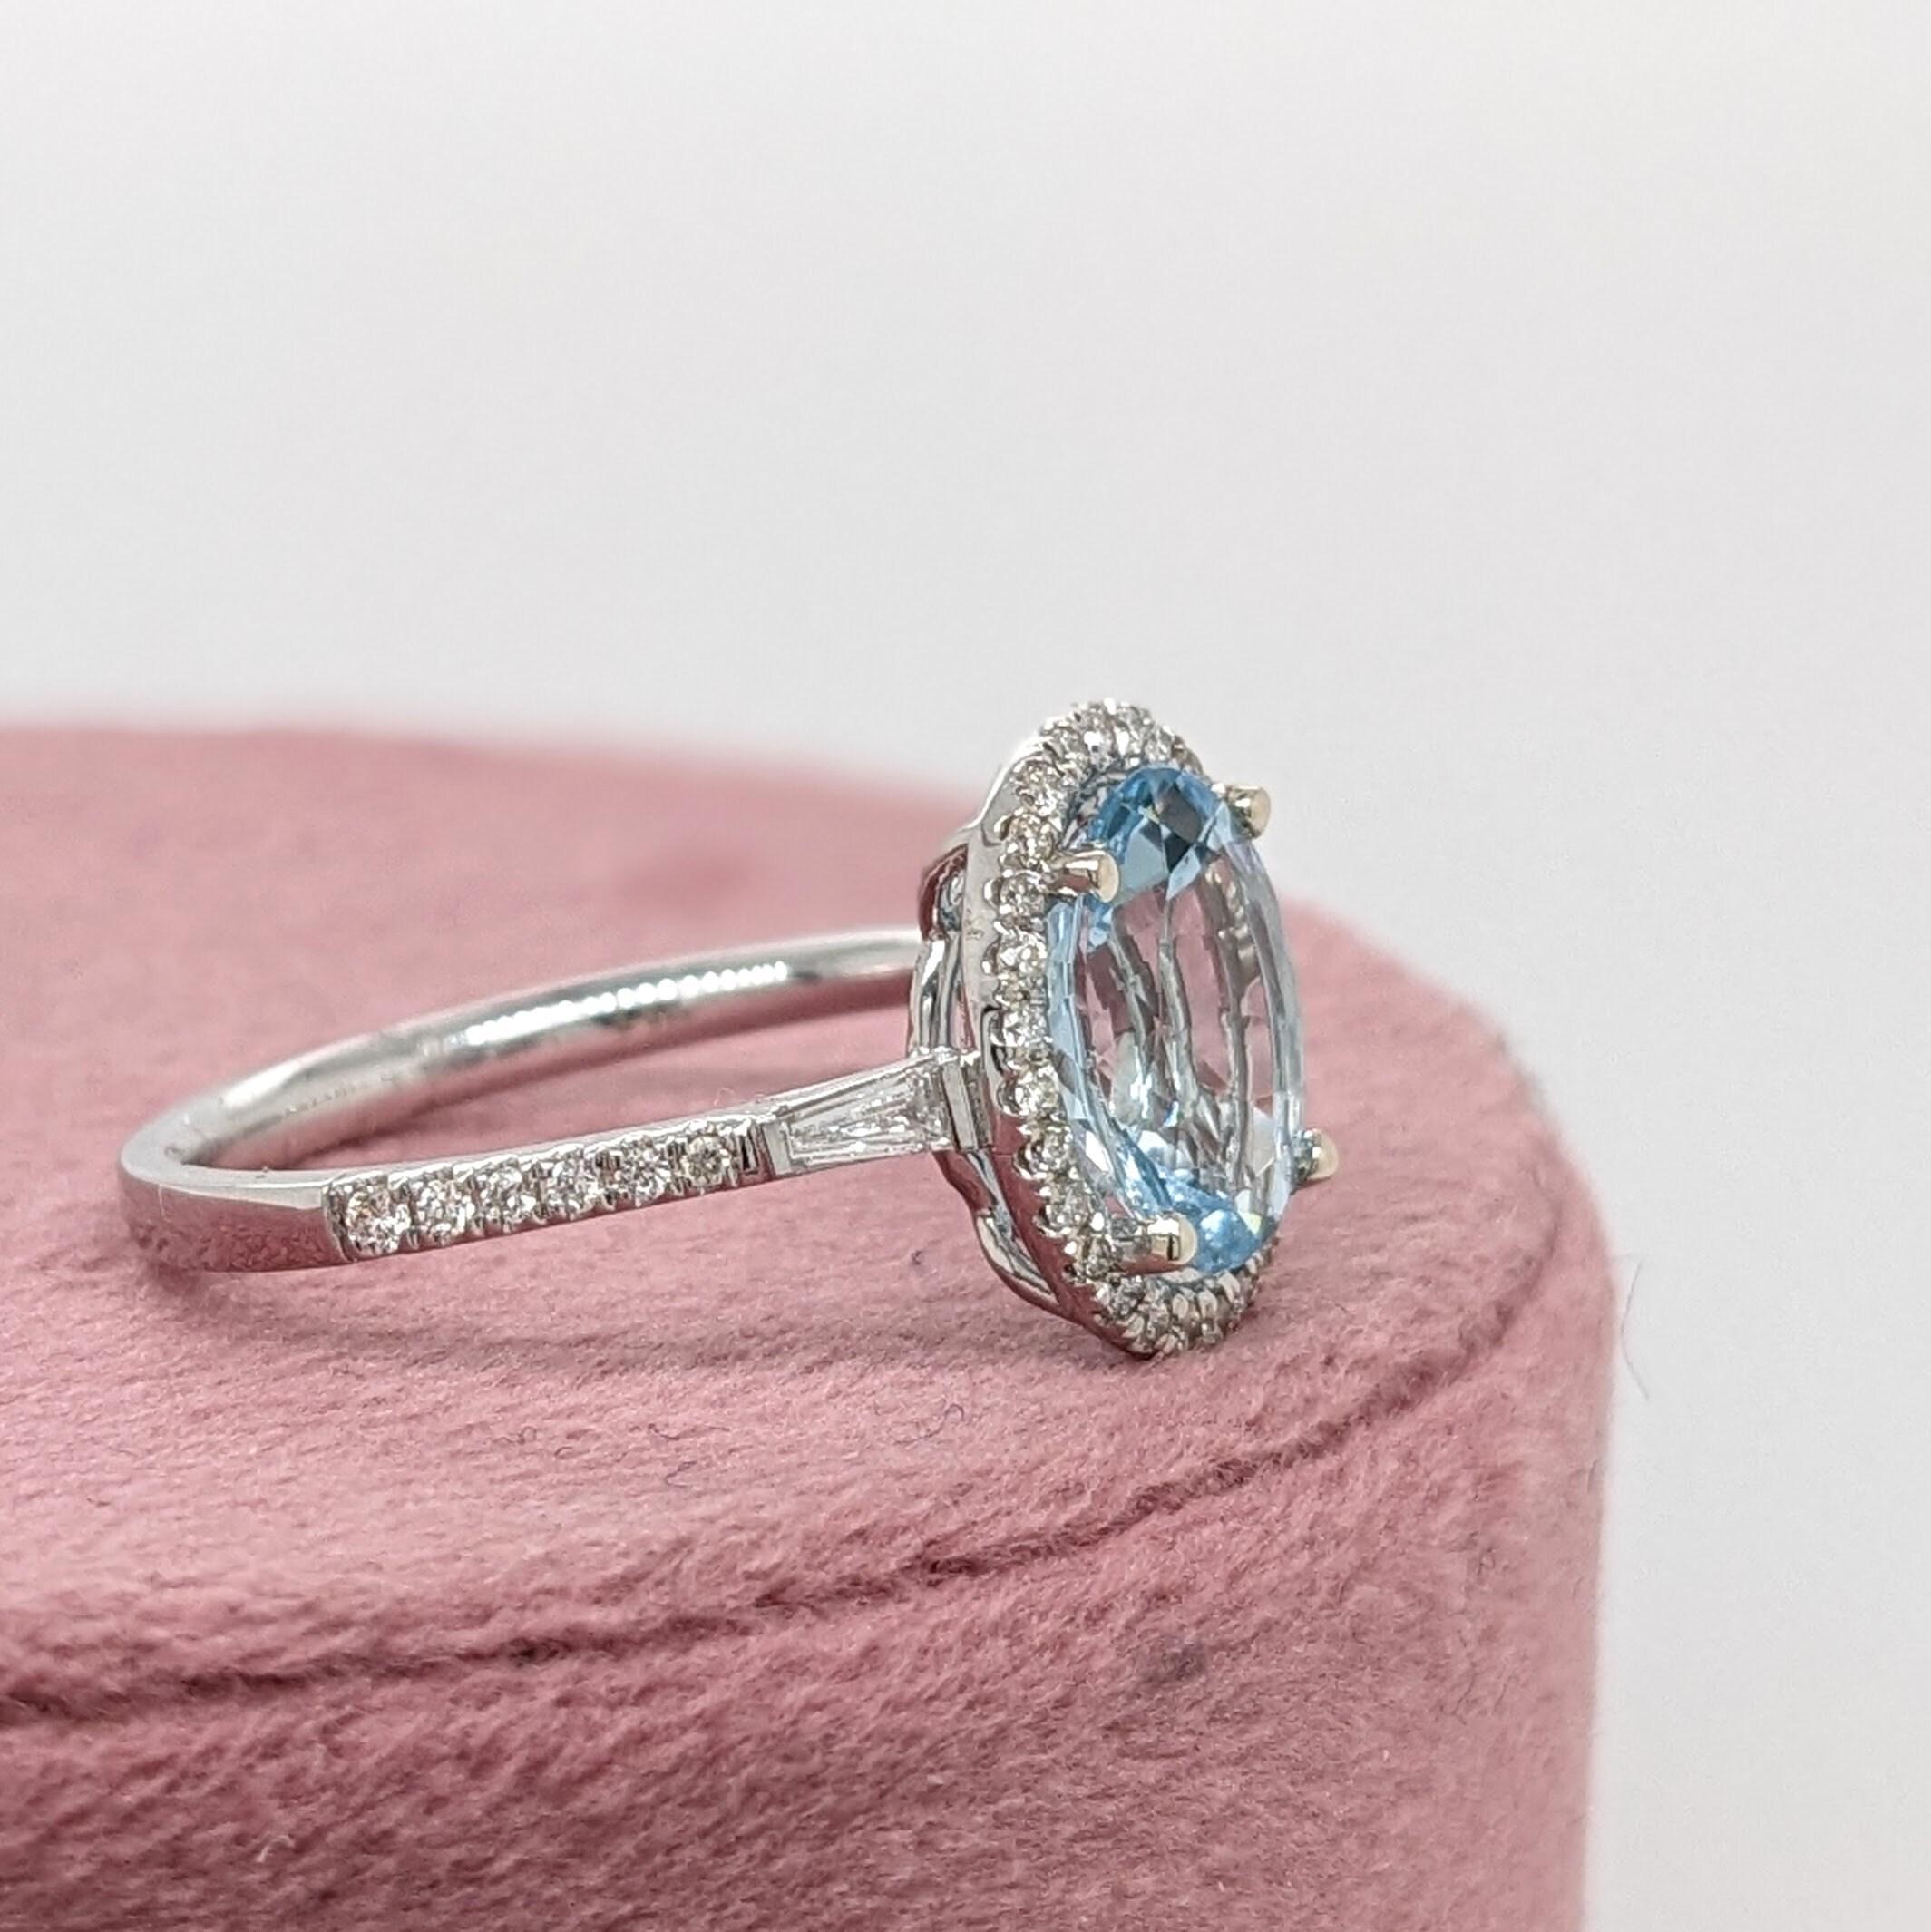 Oval Cut 1.7ct Aquamarine Ring w Earth Mined Diamonds in Solid 14K White Gold Oval 10x8mm